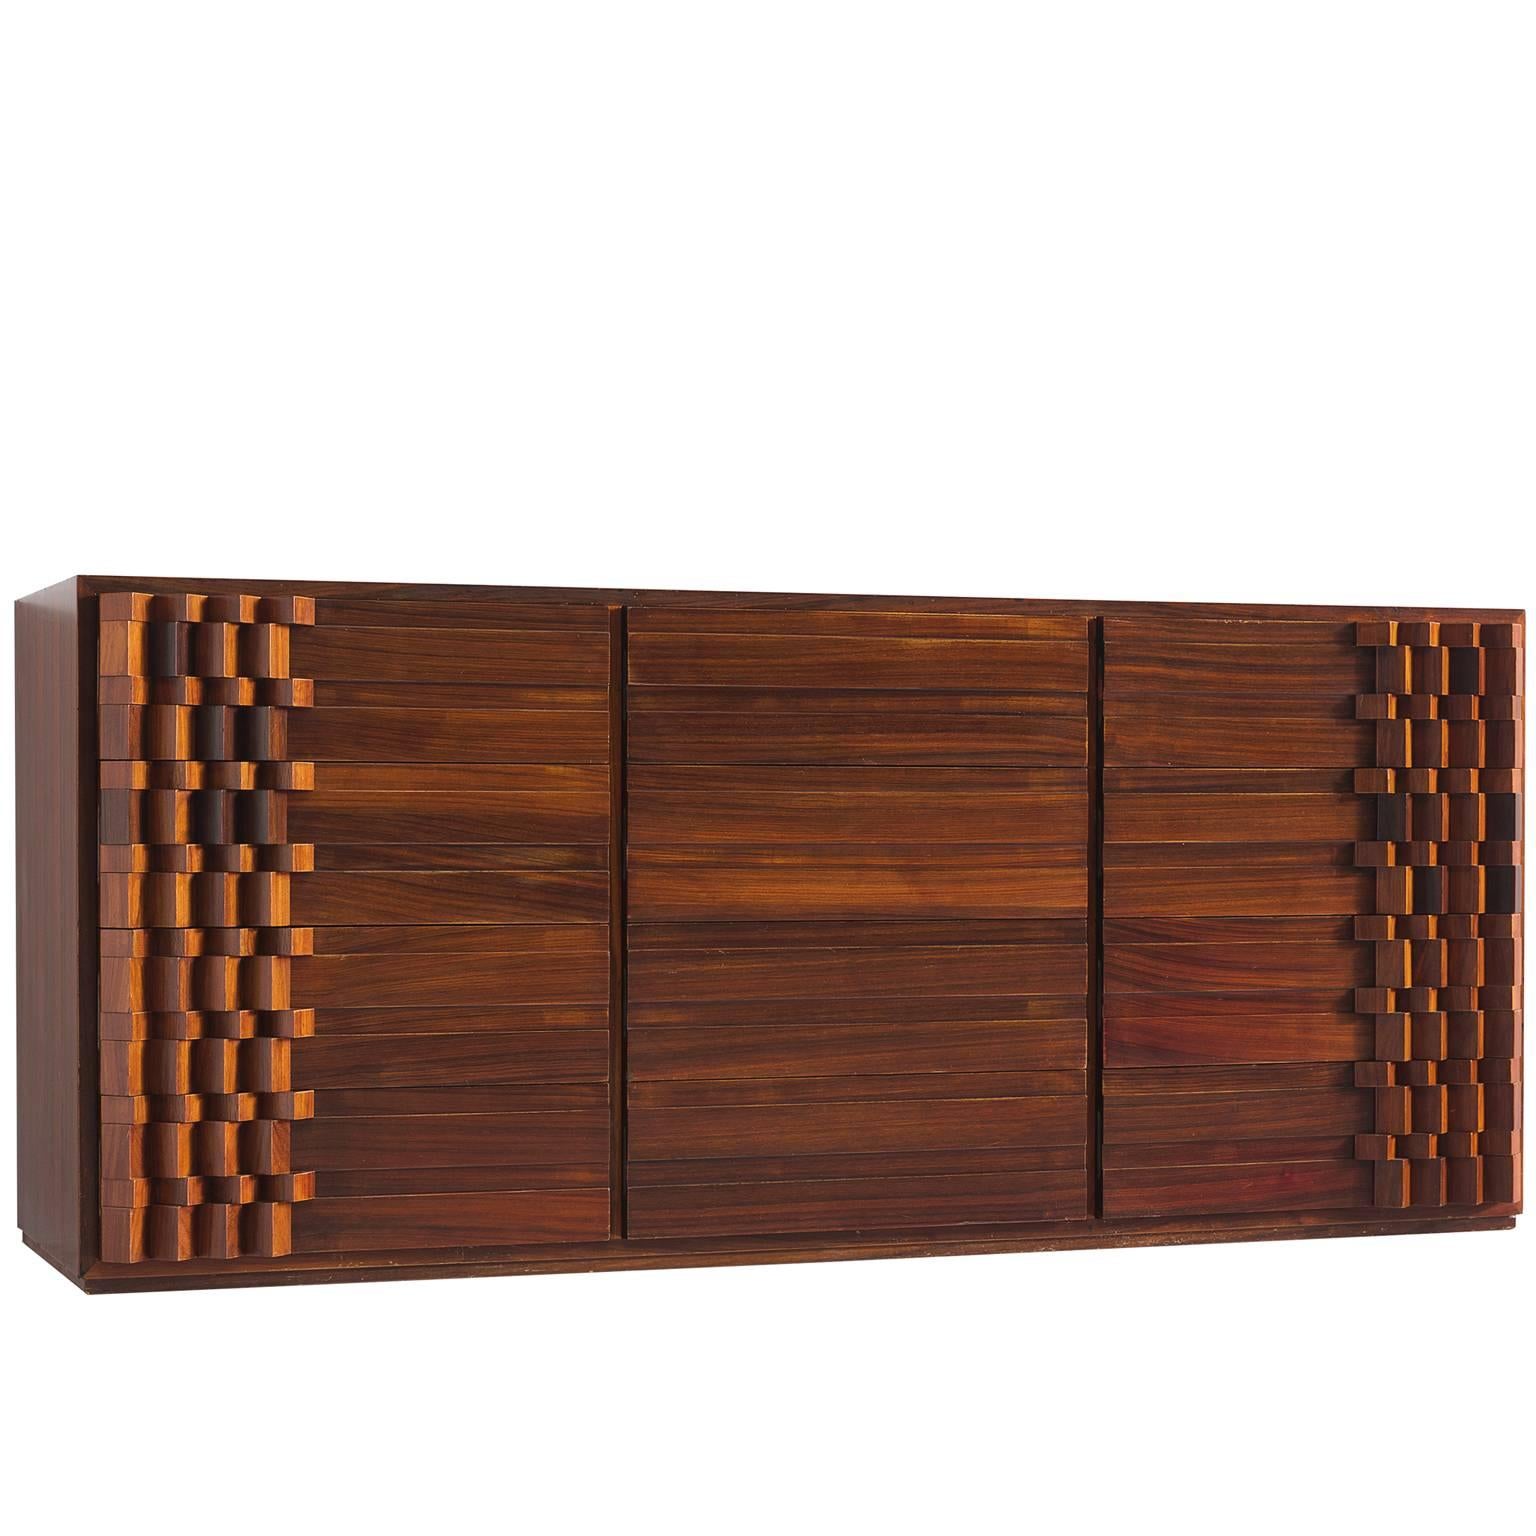 Luciana Frigerio Graphic Credenza in Rosewood